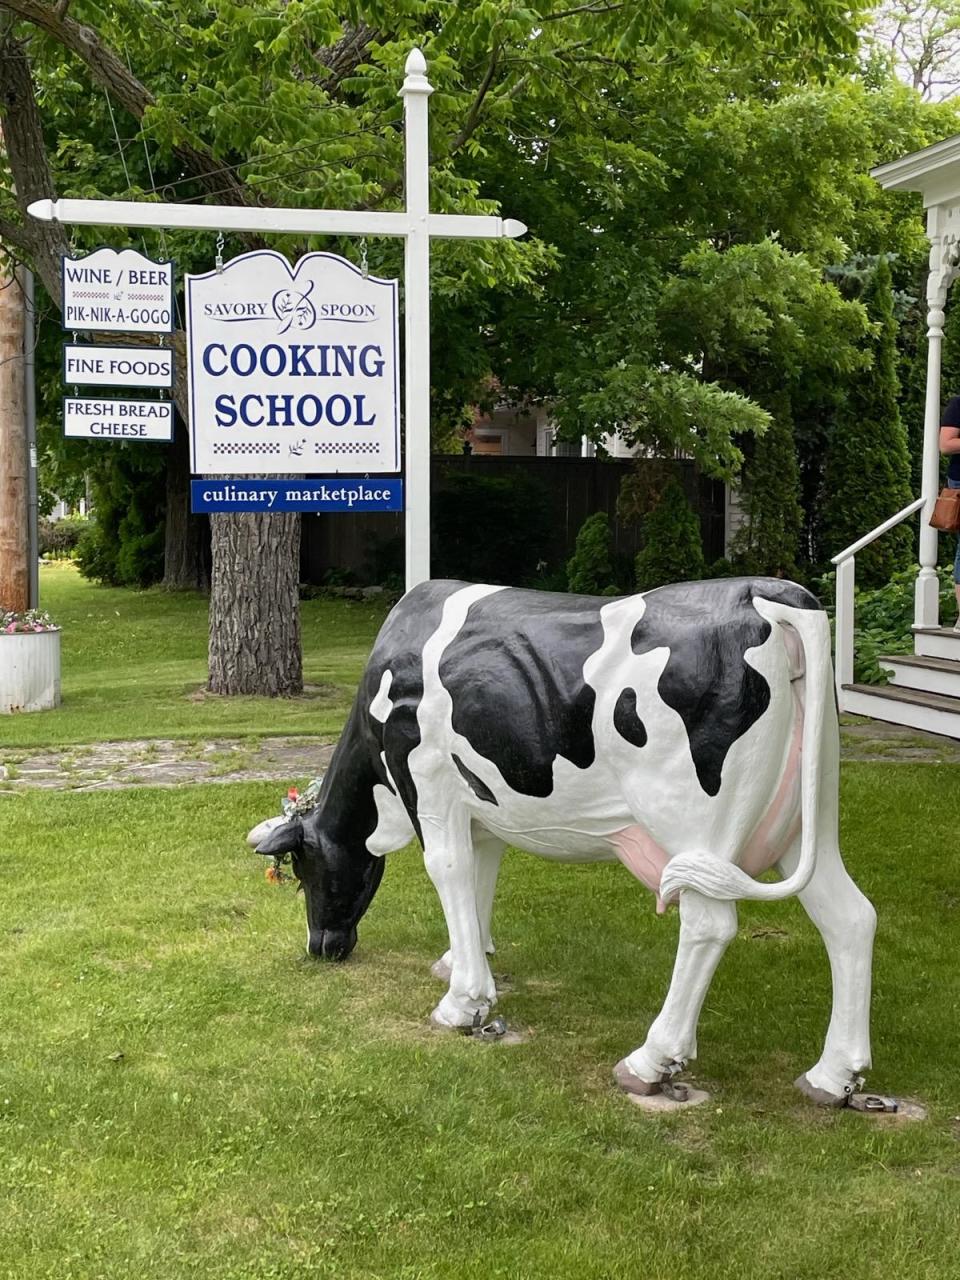 The Savory Spoon Cooking School sign has a Wisconsin flair.